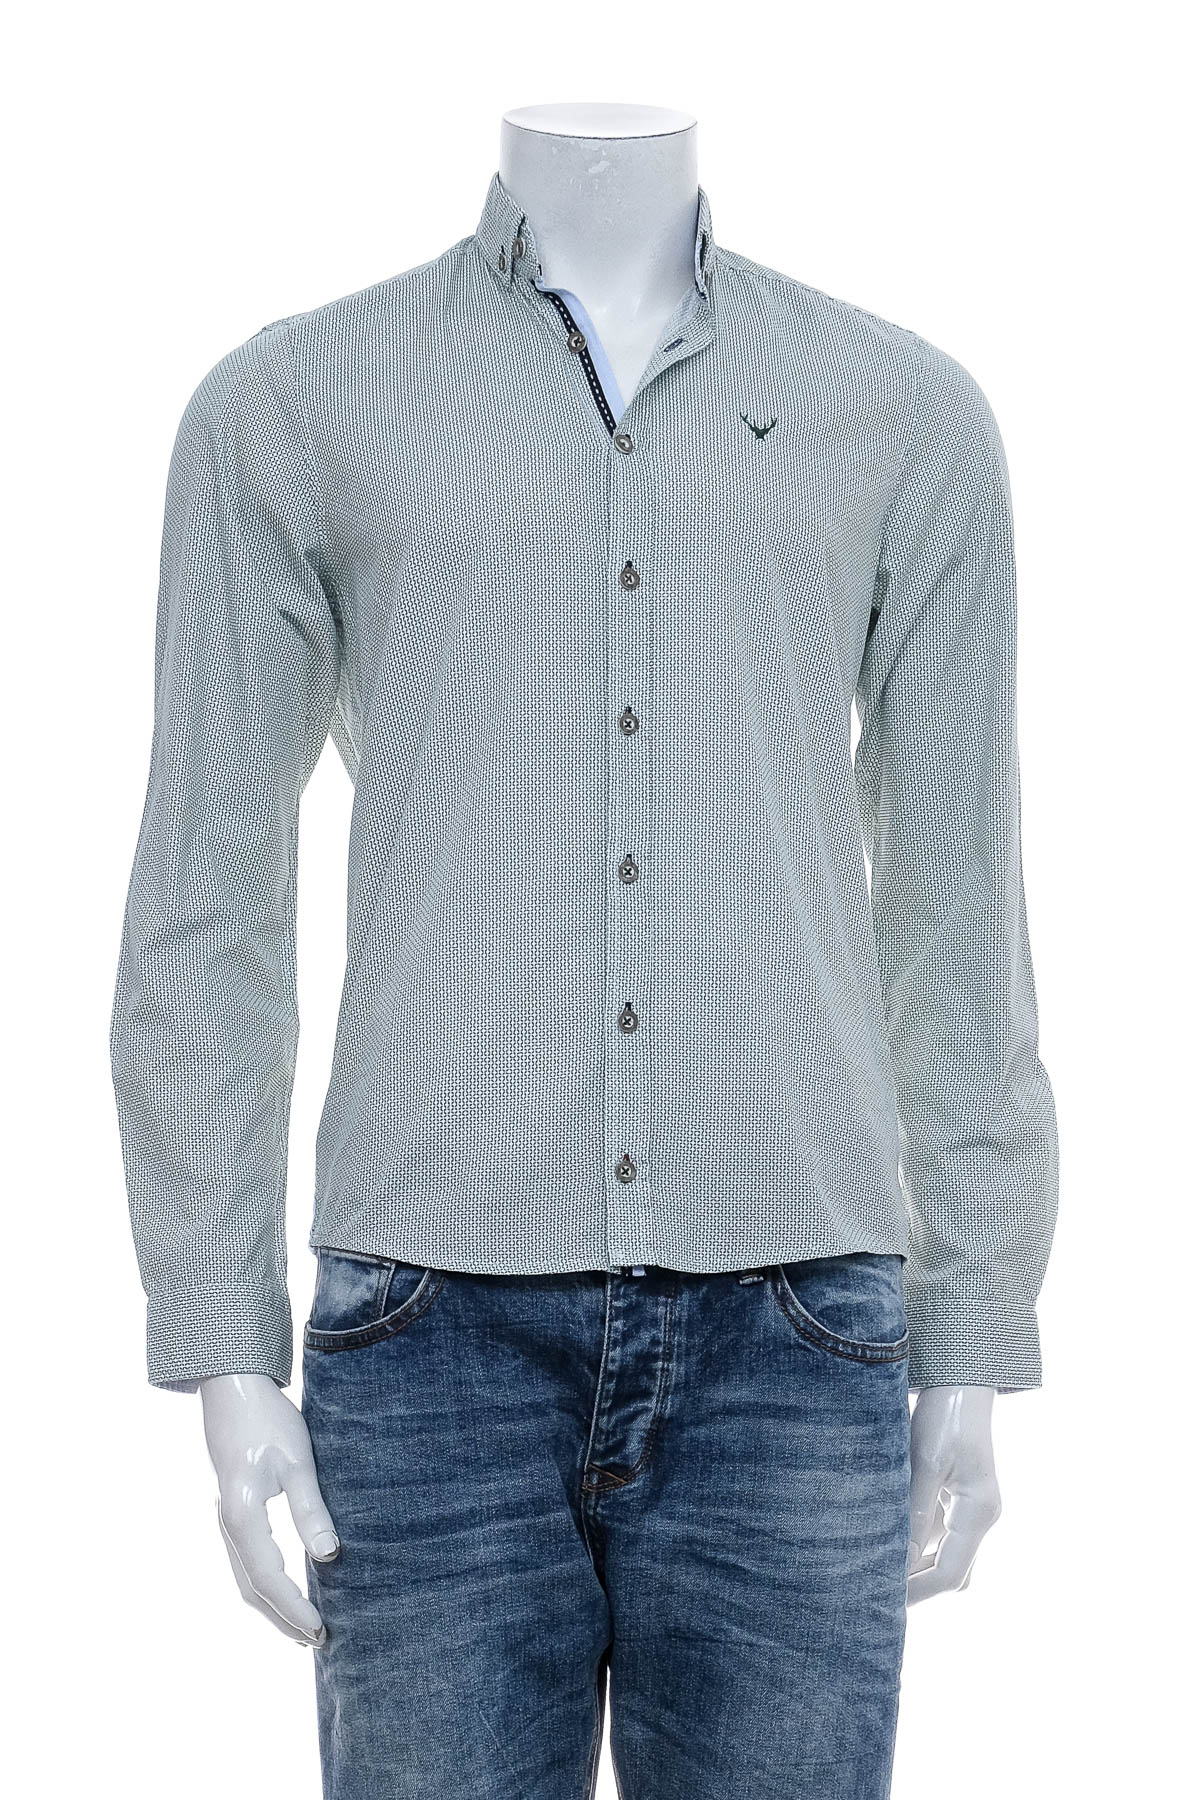 Men's shirt - Pure by H.TICO - 0